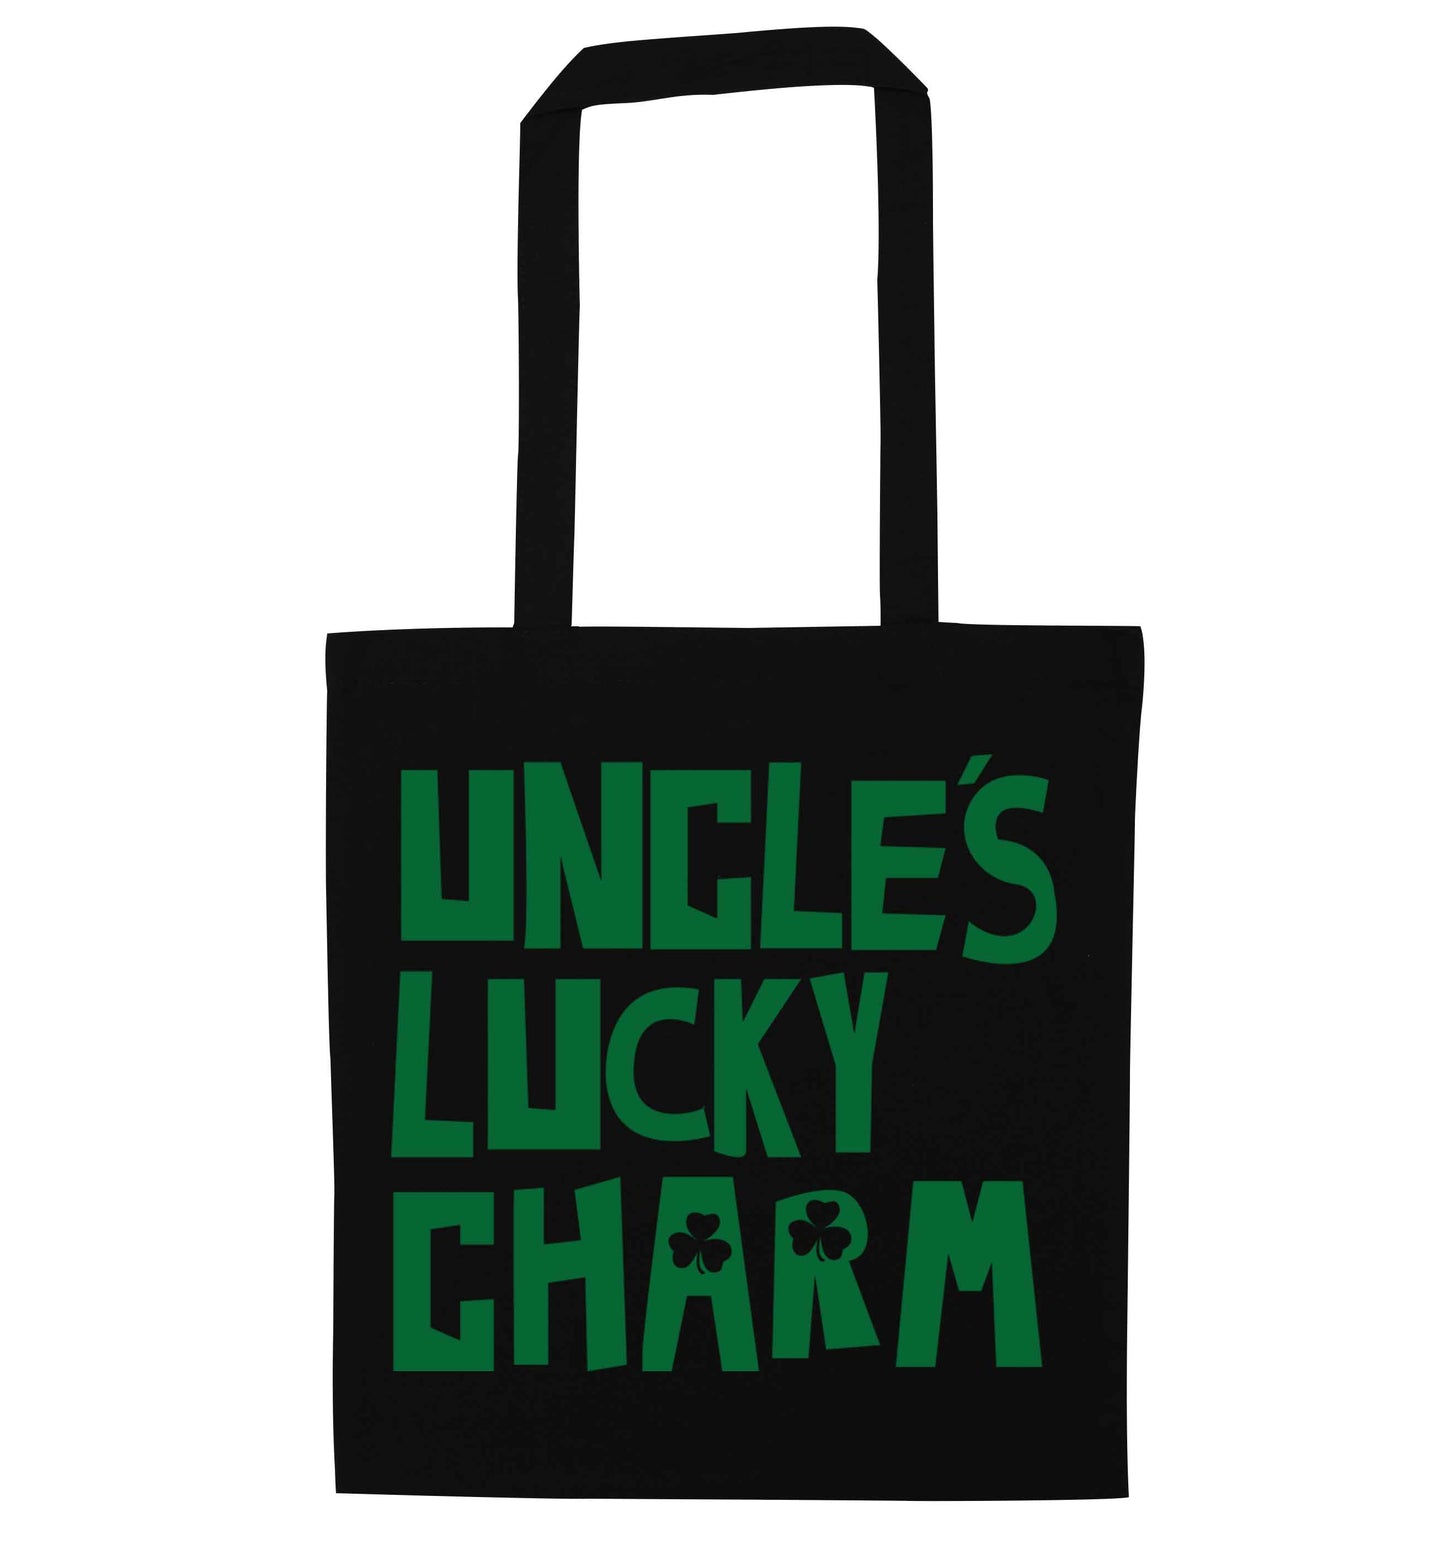 Uncles lucky charm black tote bag